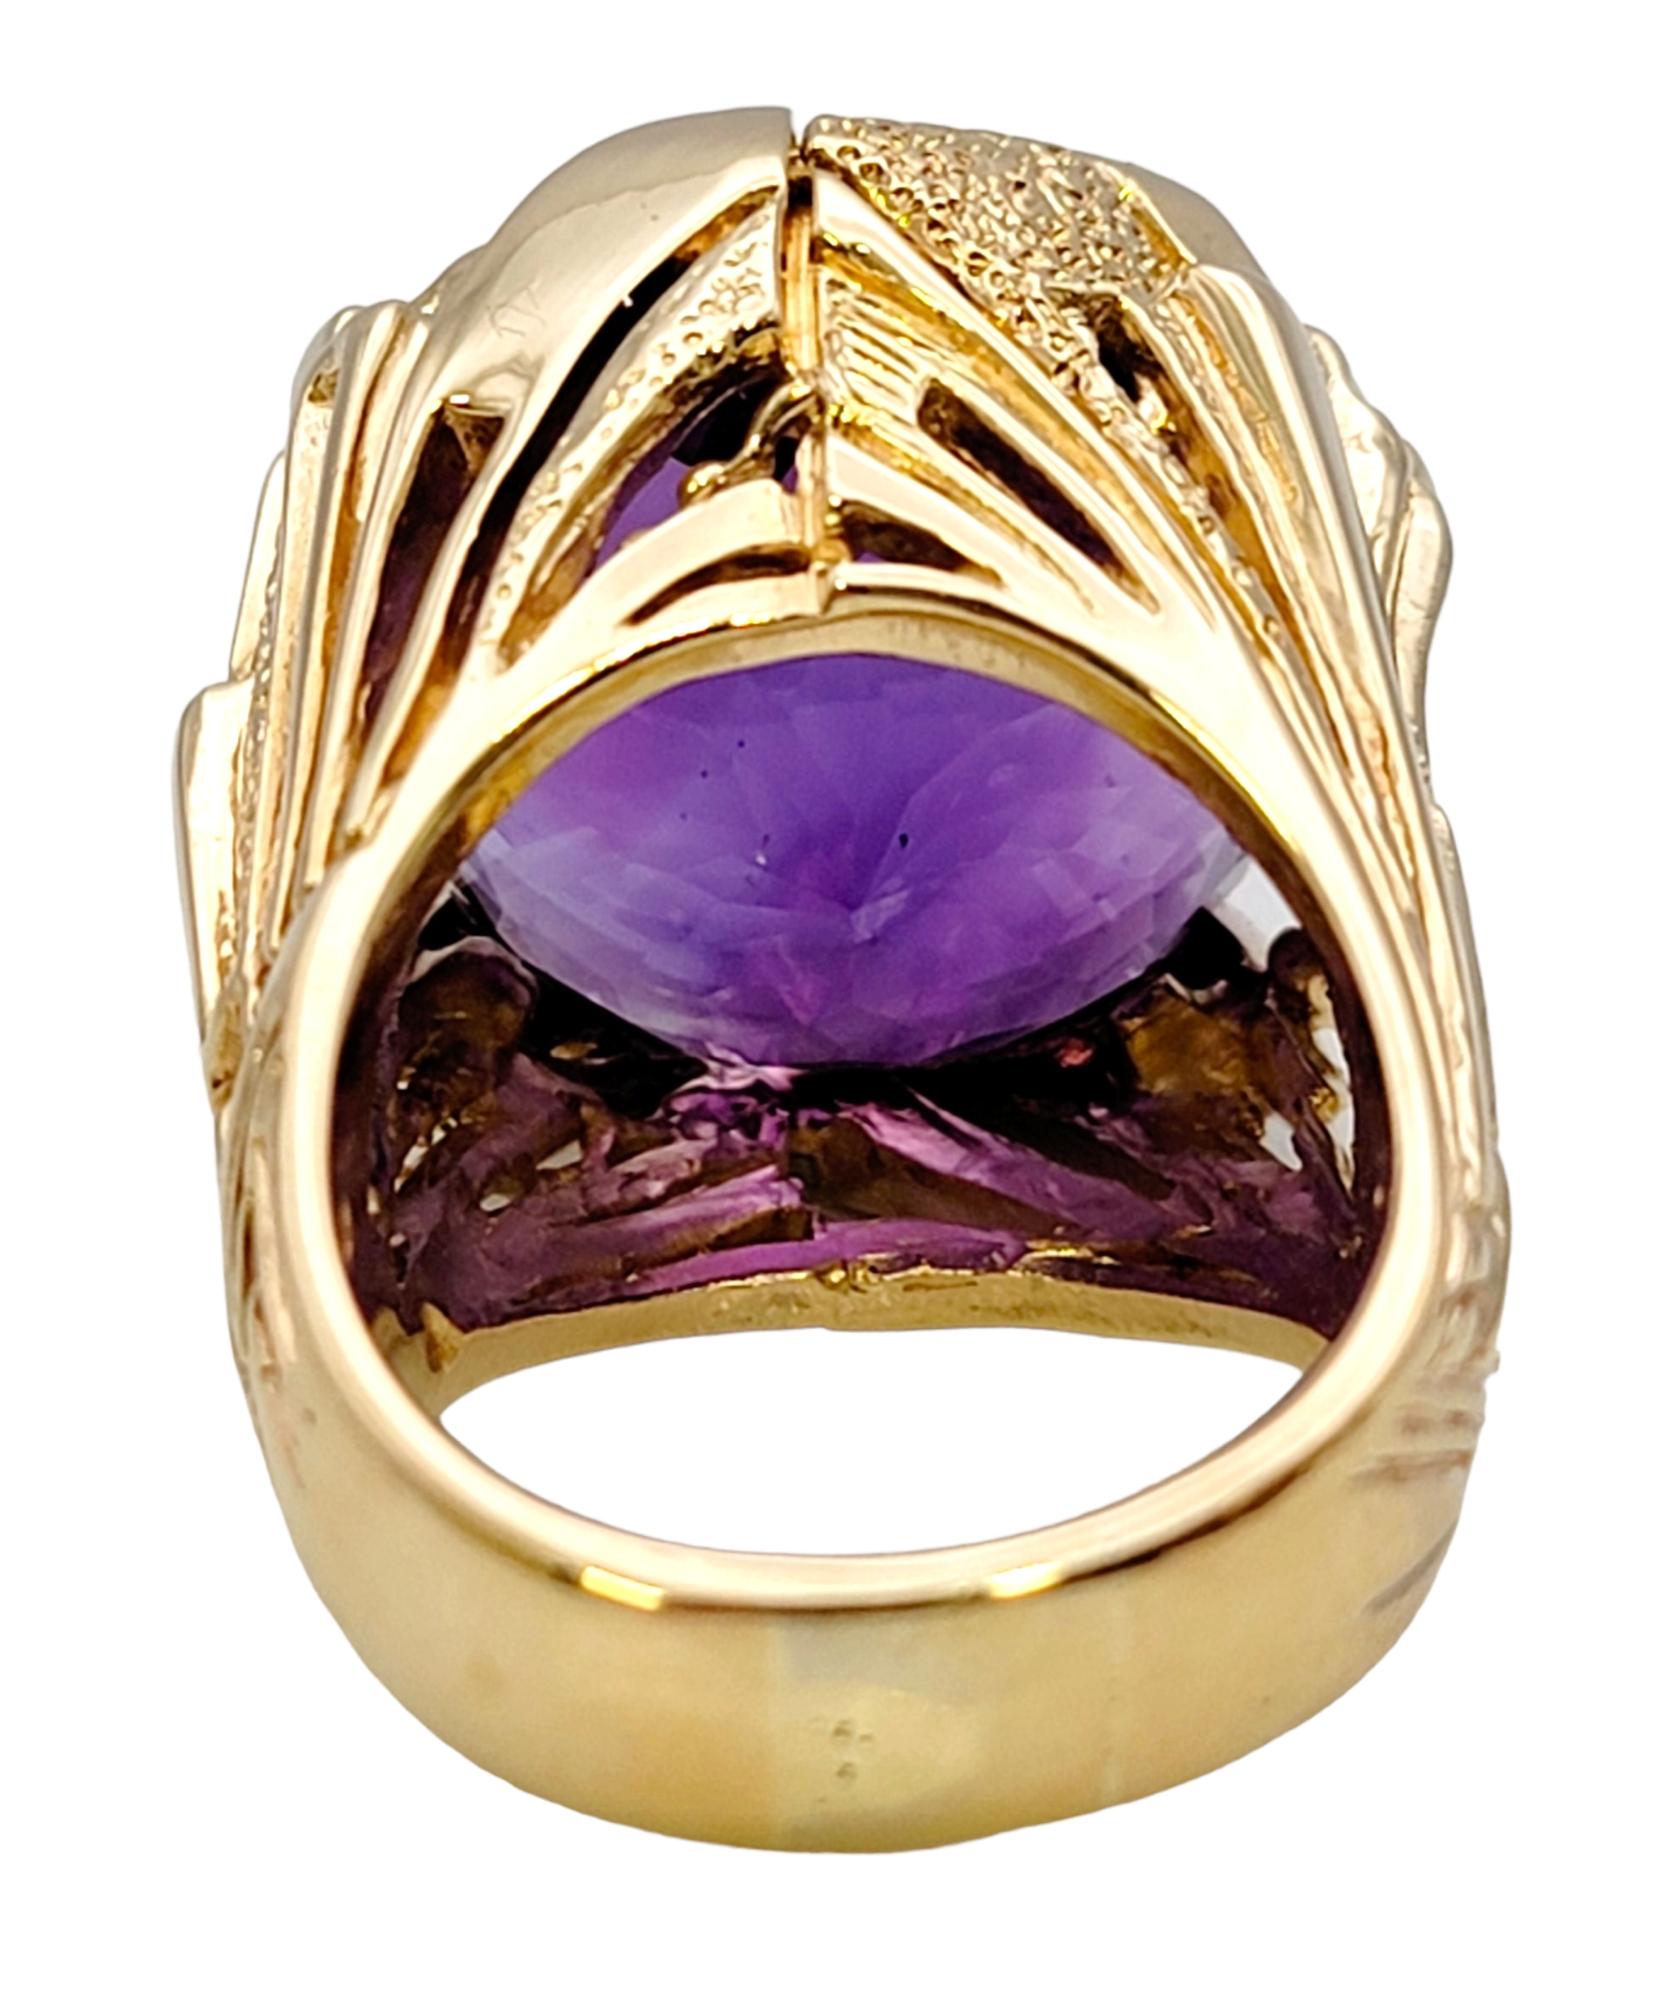 Massive 40.01 Carat Round Cut Amethyst Solitaire Cocktail Ring in Yellow Gold  For Sale 3